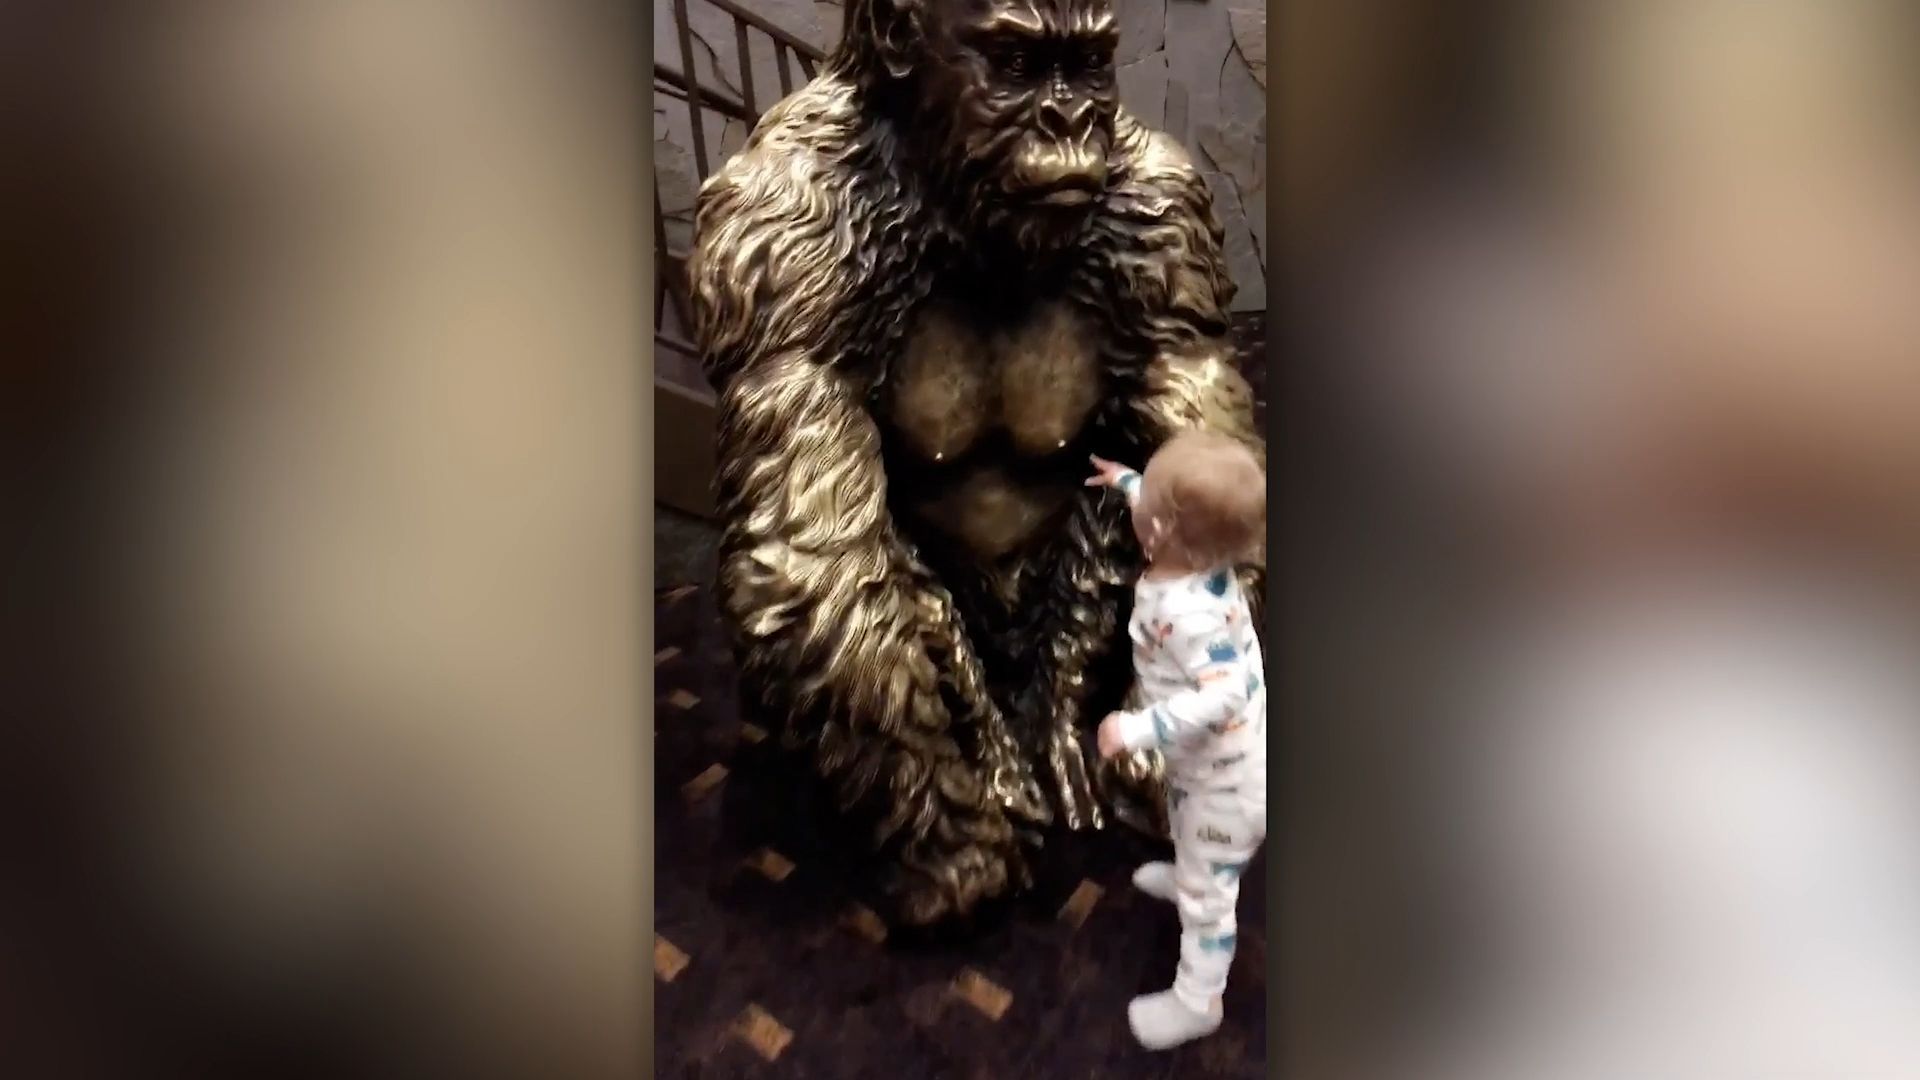 Baby wants to be breastfed by gorilla statue